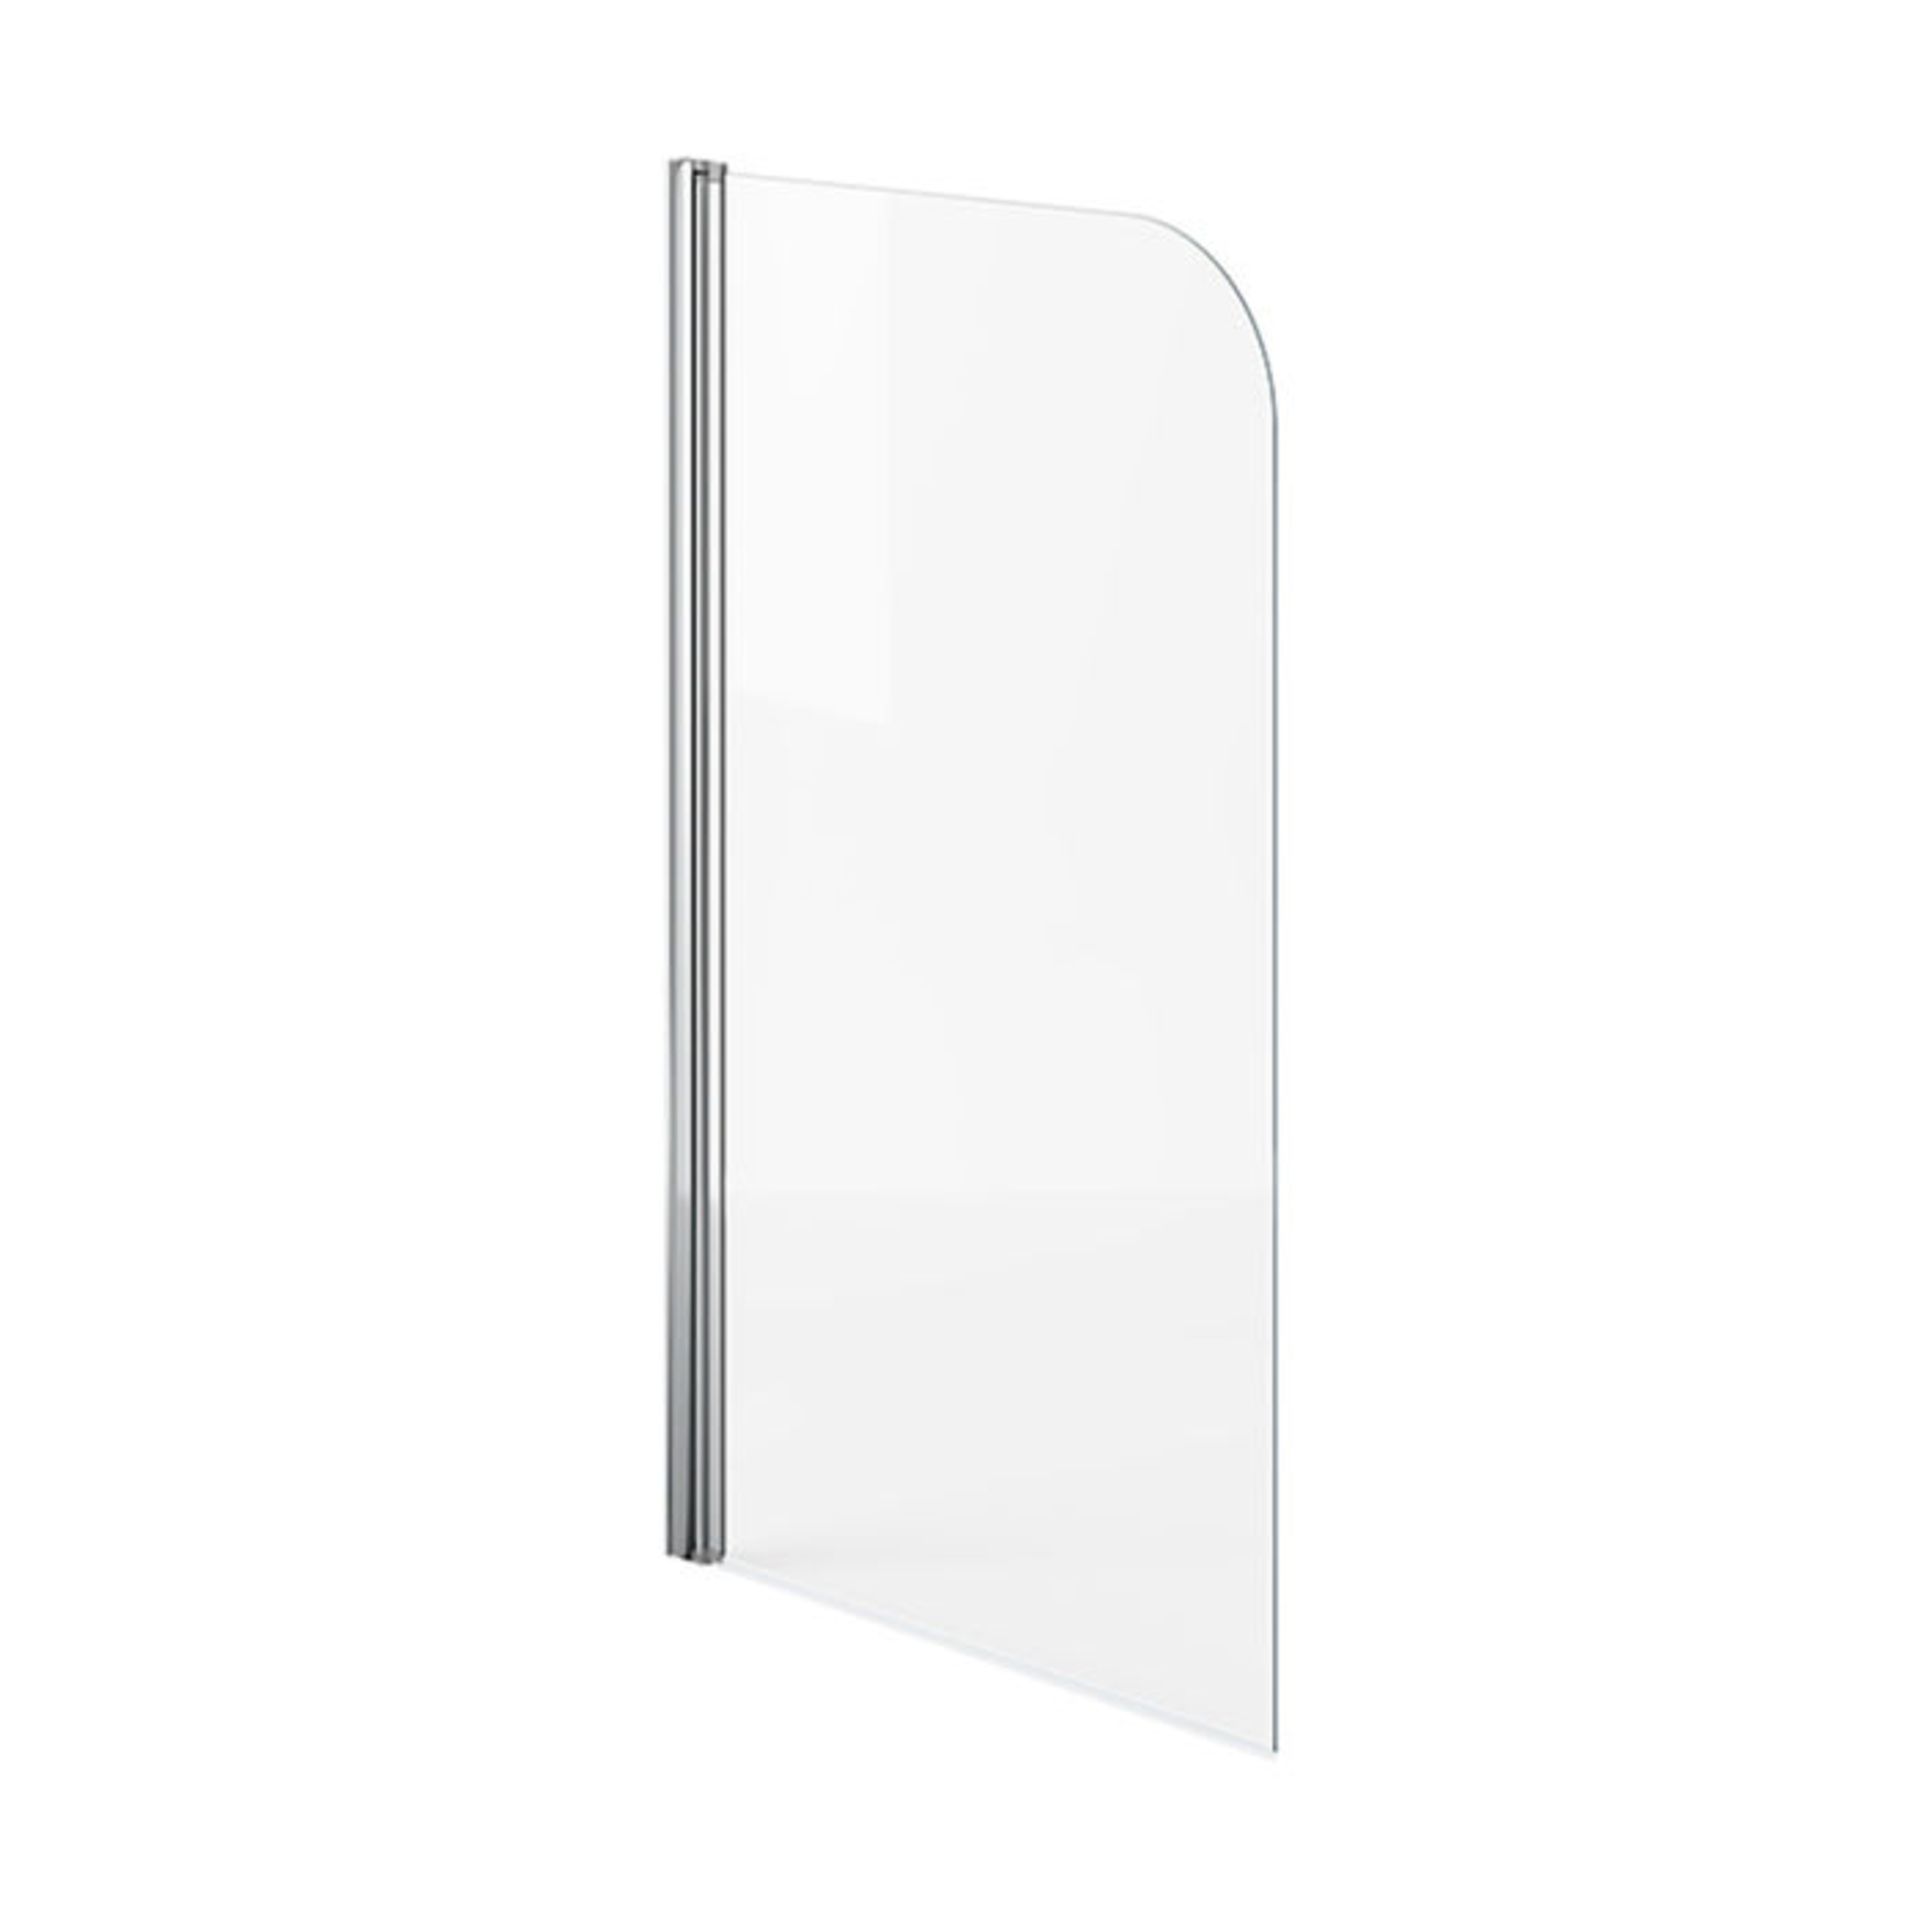 (XX32) 800mm Bath Shower Screen. RRP £249.99. Great addition to your shower bath 4mm tempered...